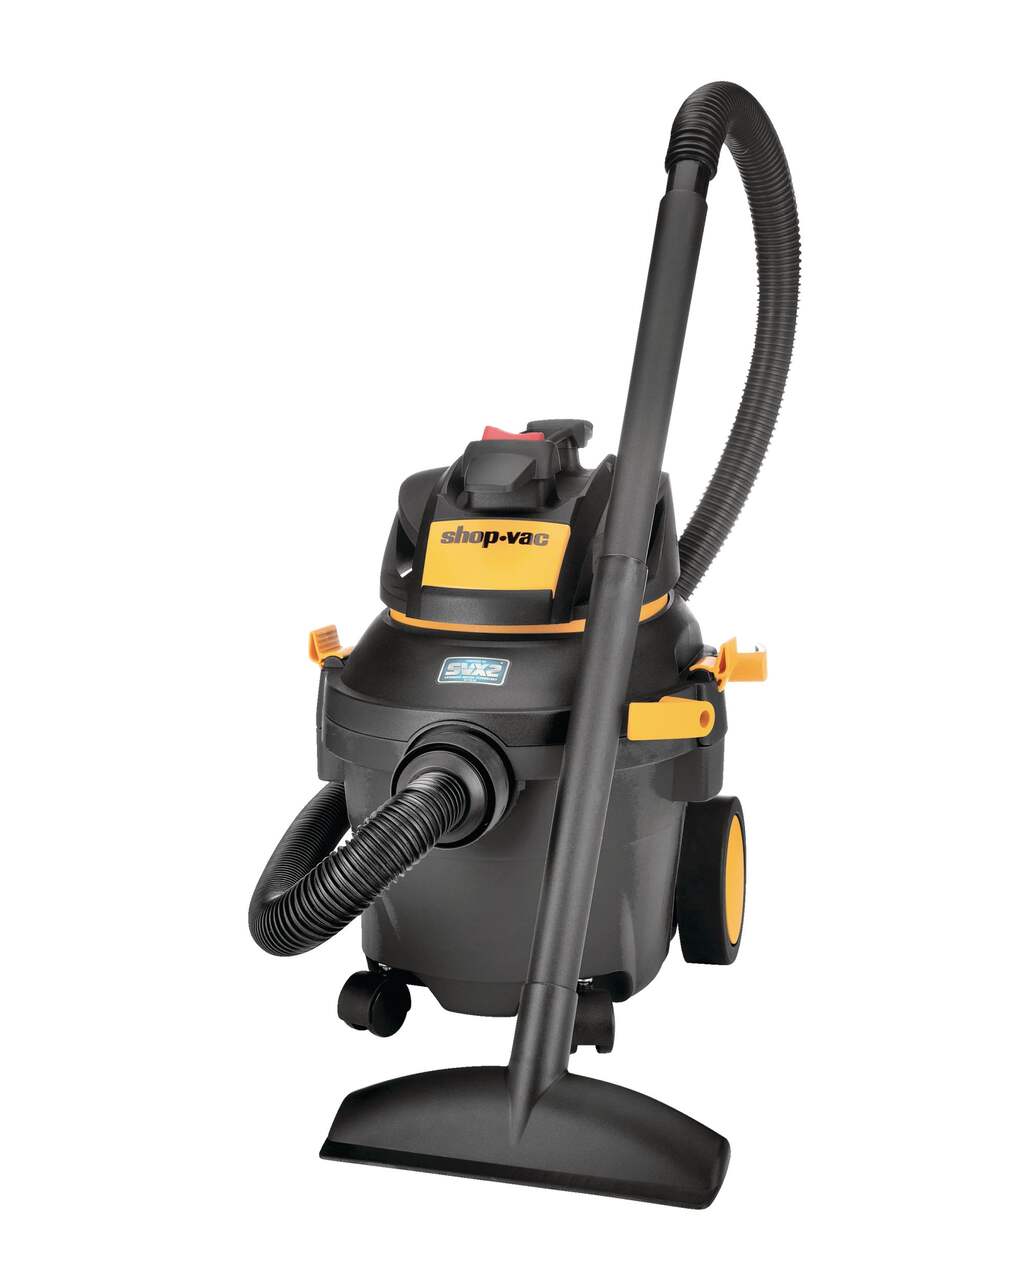 Michael's Equipment :: Products :: Canister Vacuums - Dry